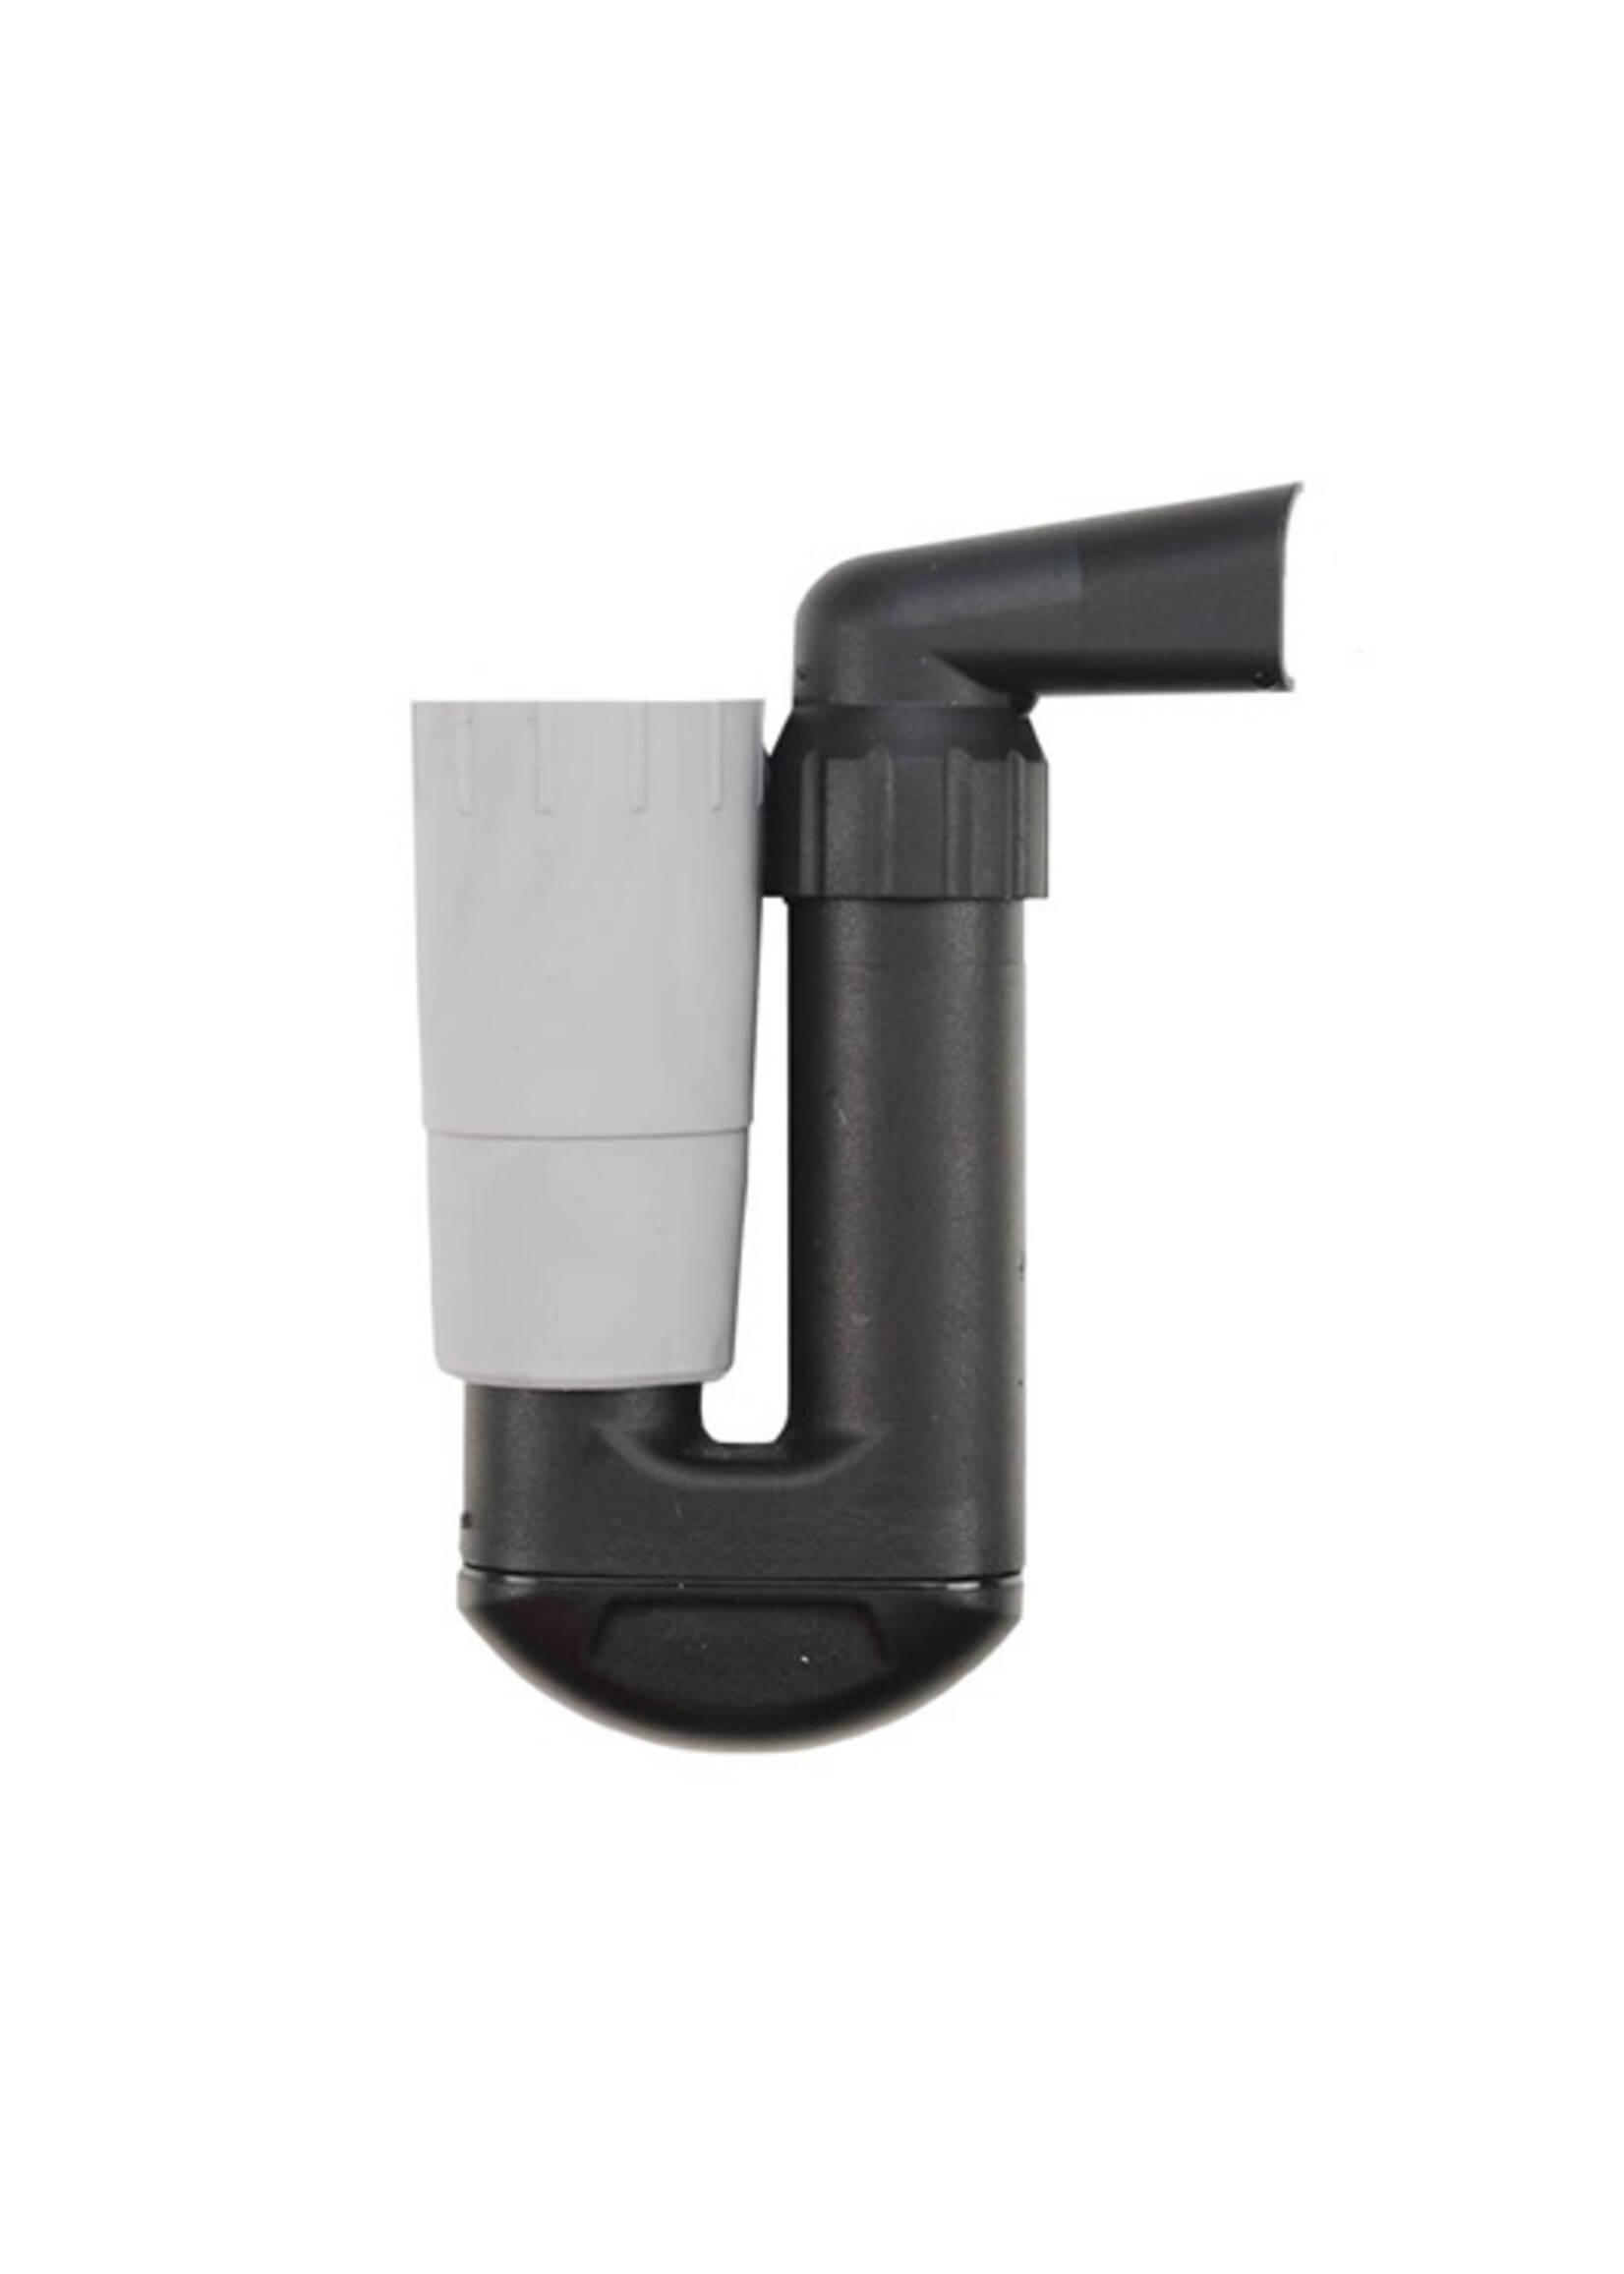 Fluval Fluval Replacement Output Nozzle for 07 Series Filters (A20053)